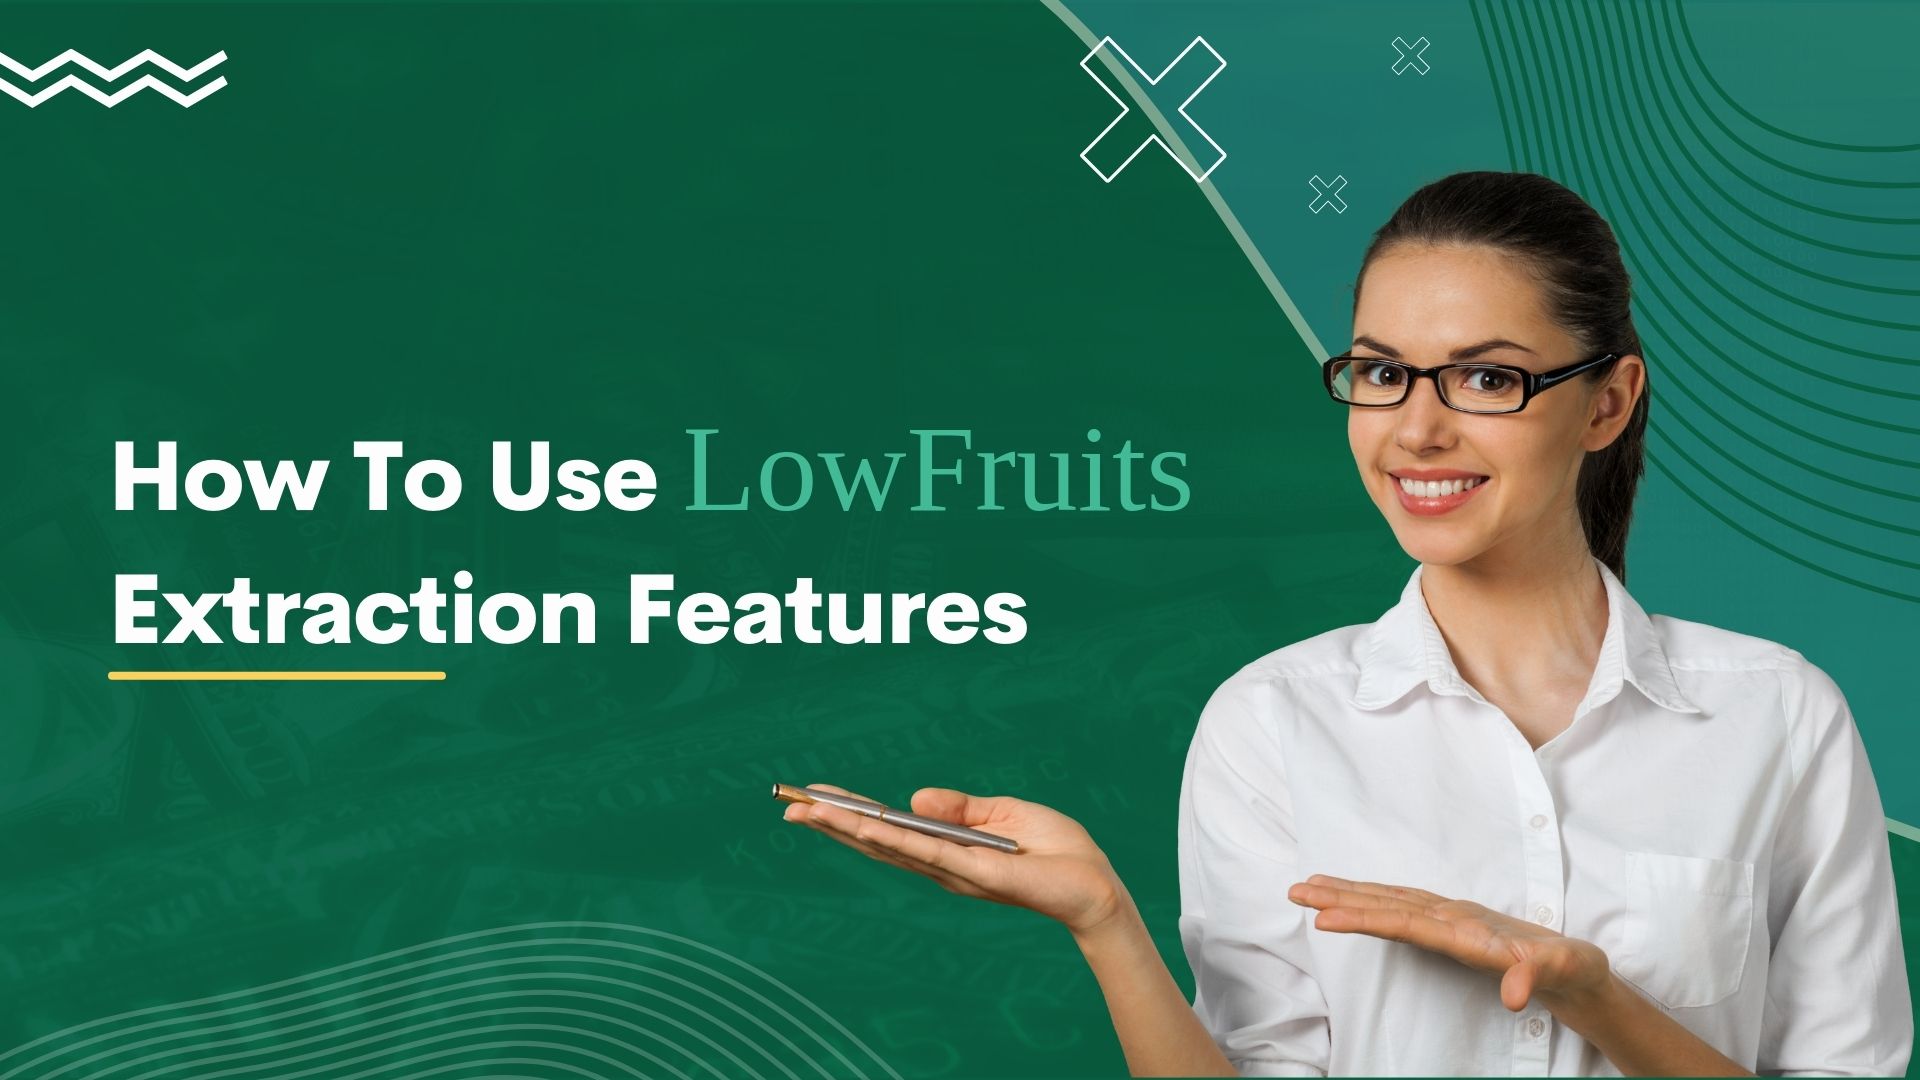 Learn how to maximize SEO with LowFruits' Extraction Features.